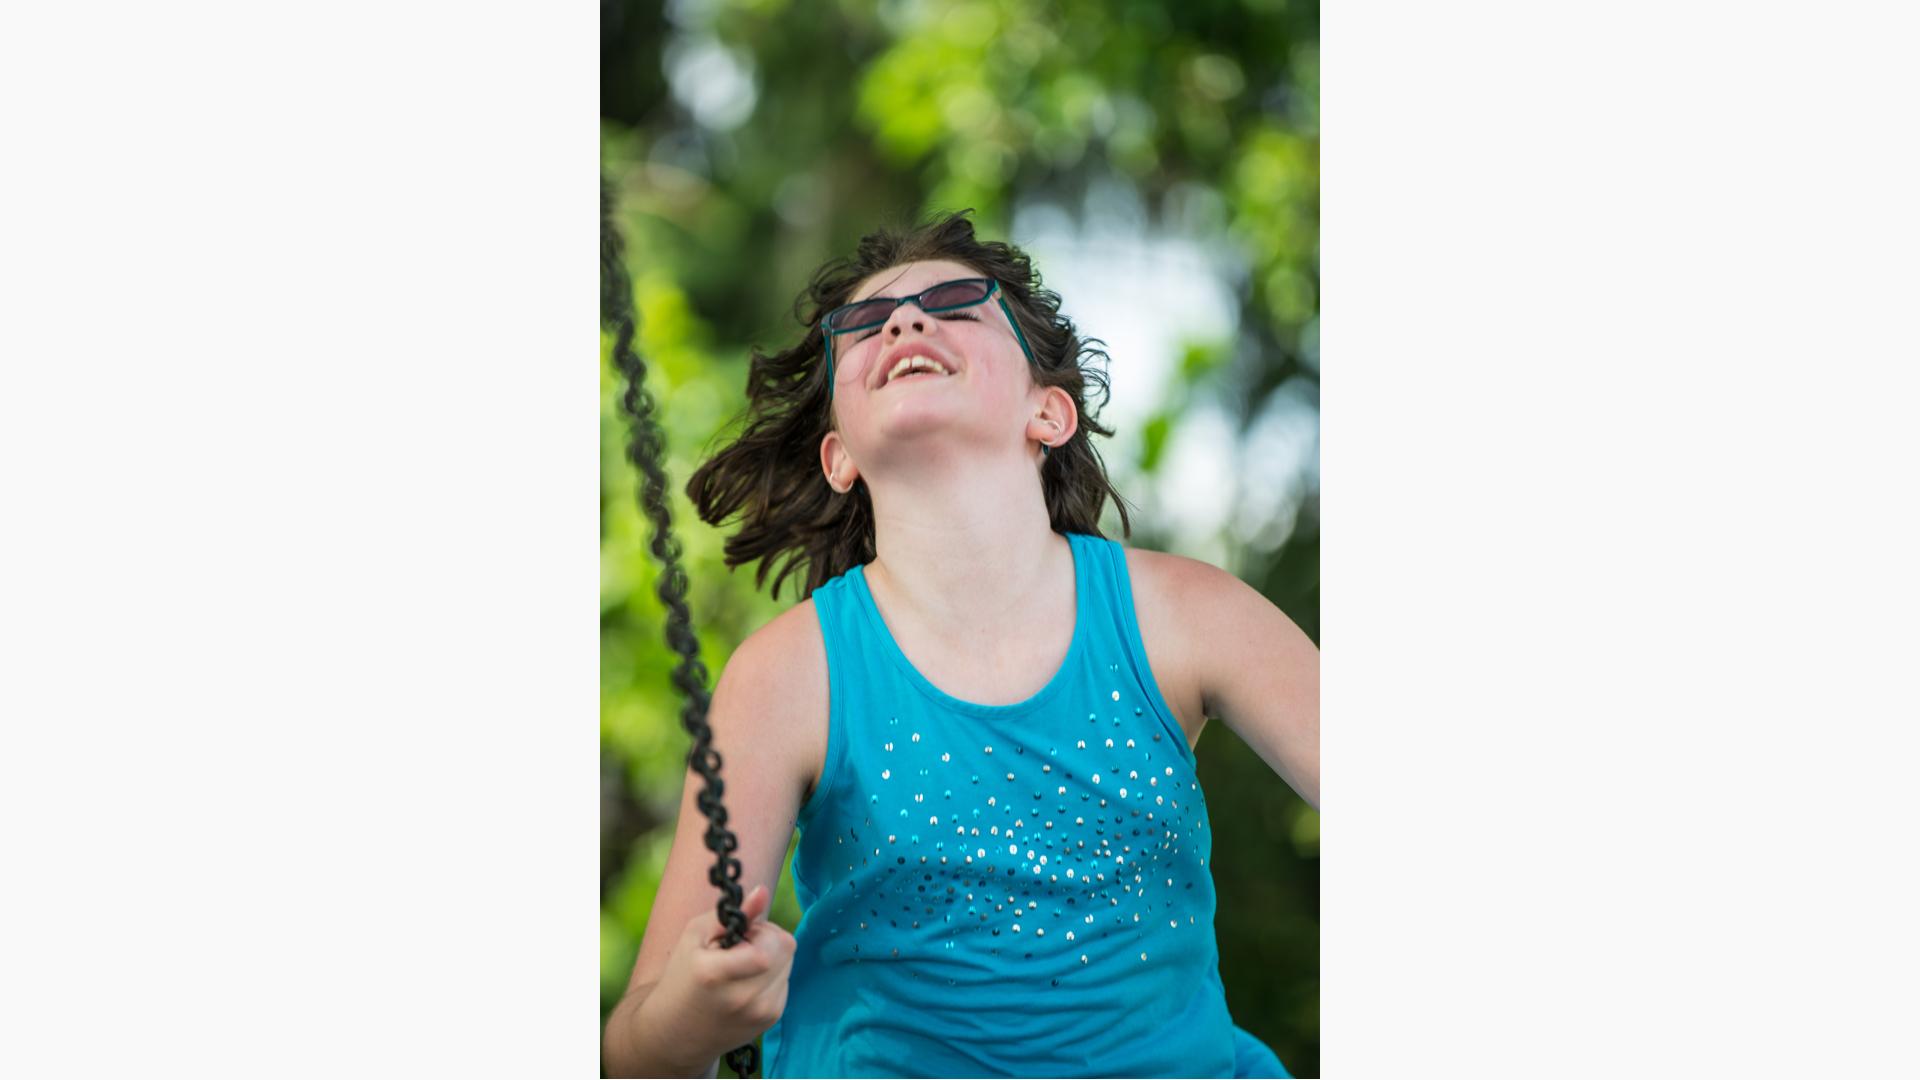 Girl in sunglasses enjoys riding a swing